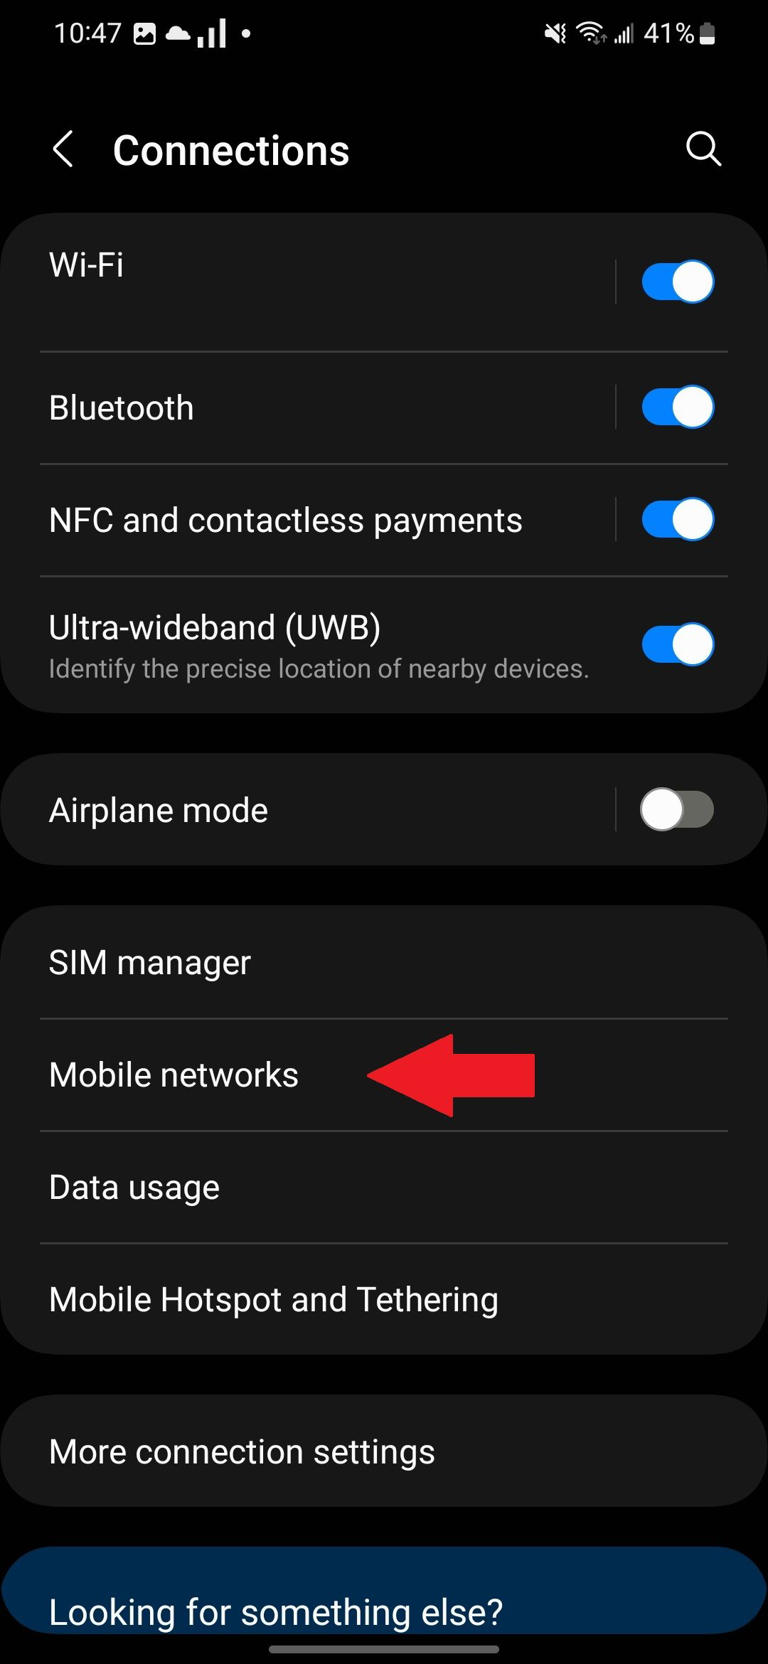 The Connections section in the Samsung Settings app with a red arrow pointing to the Mobile Networks option